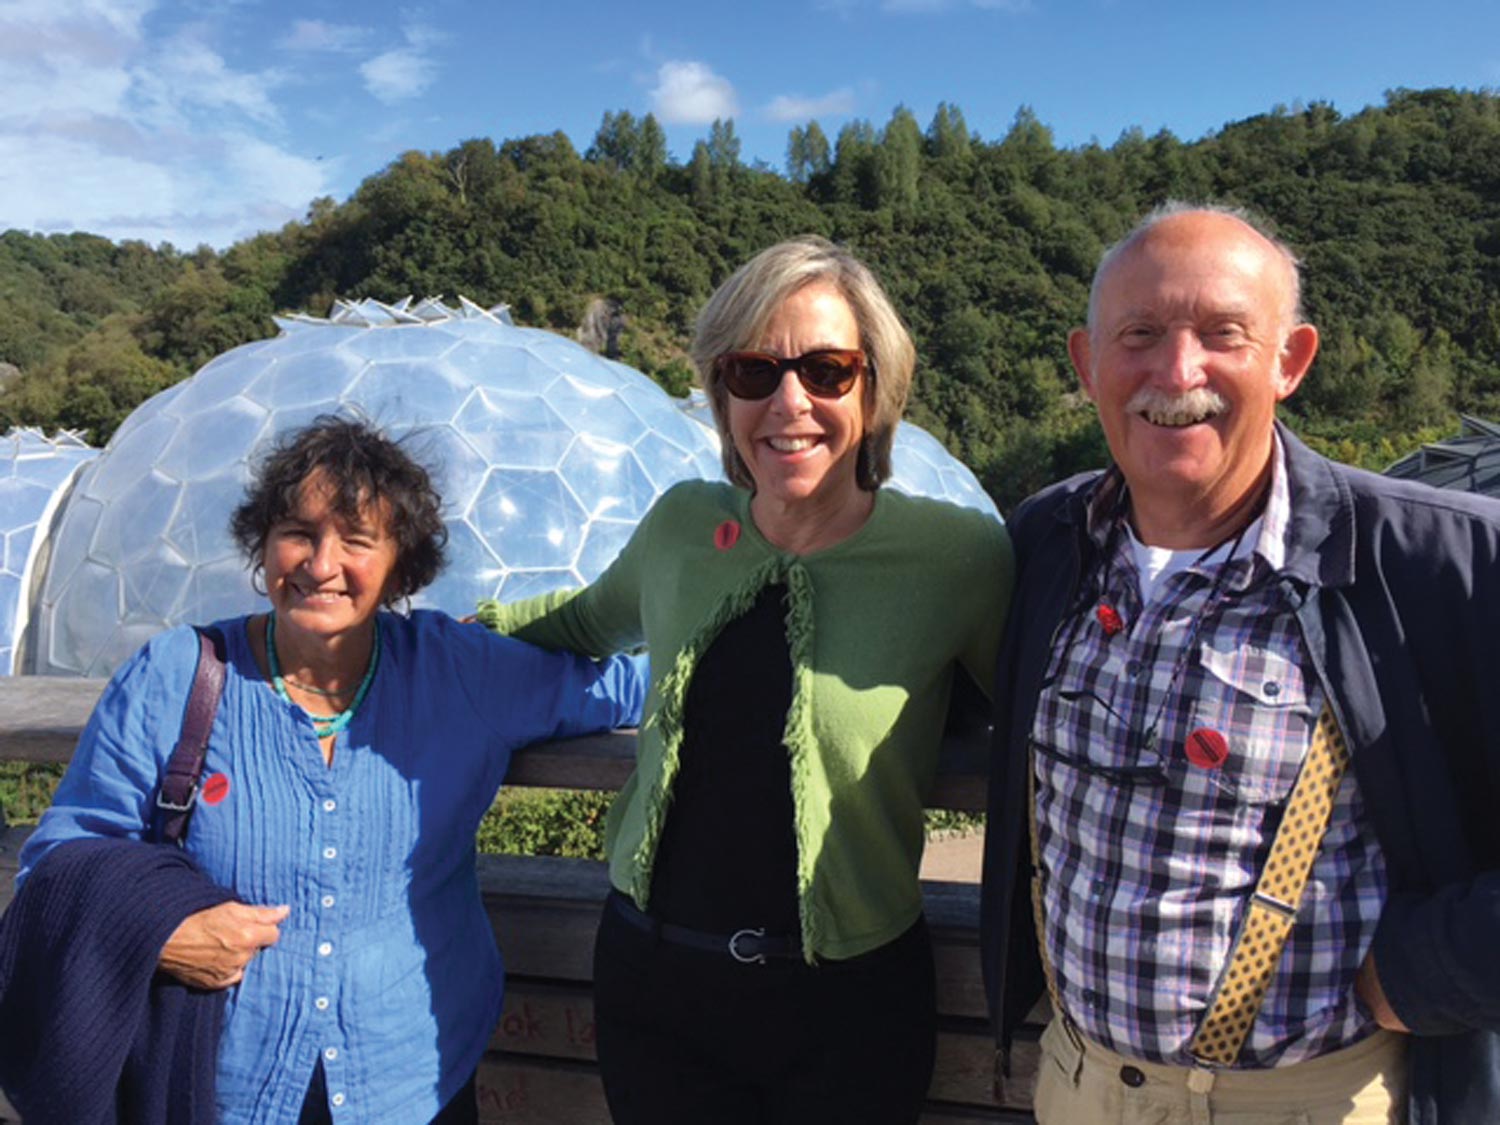   Wife Ann Foster, Artistic Director Kristin Poole, and Tony Foster visiting the Eden Project, a global garden, in Cornwall, 2016.    Photo by Paul Salisbury 